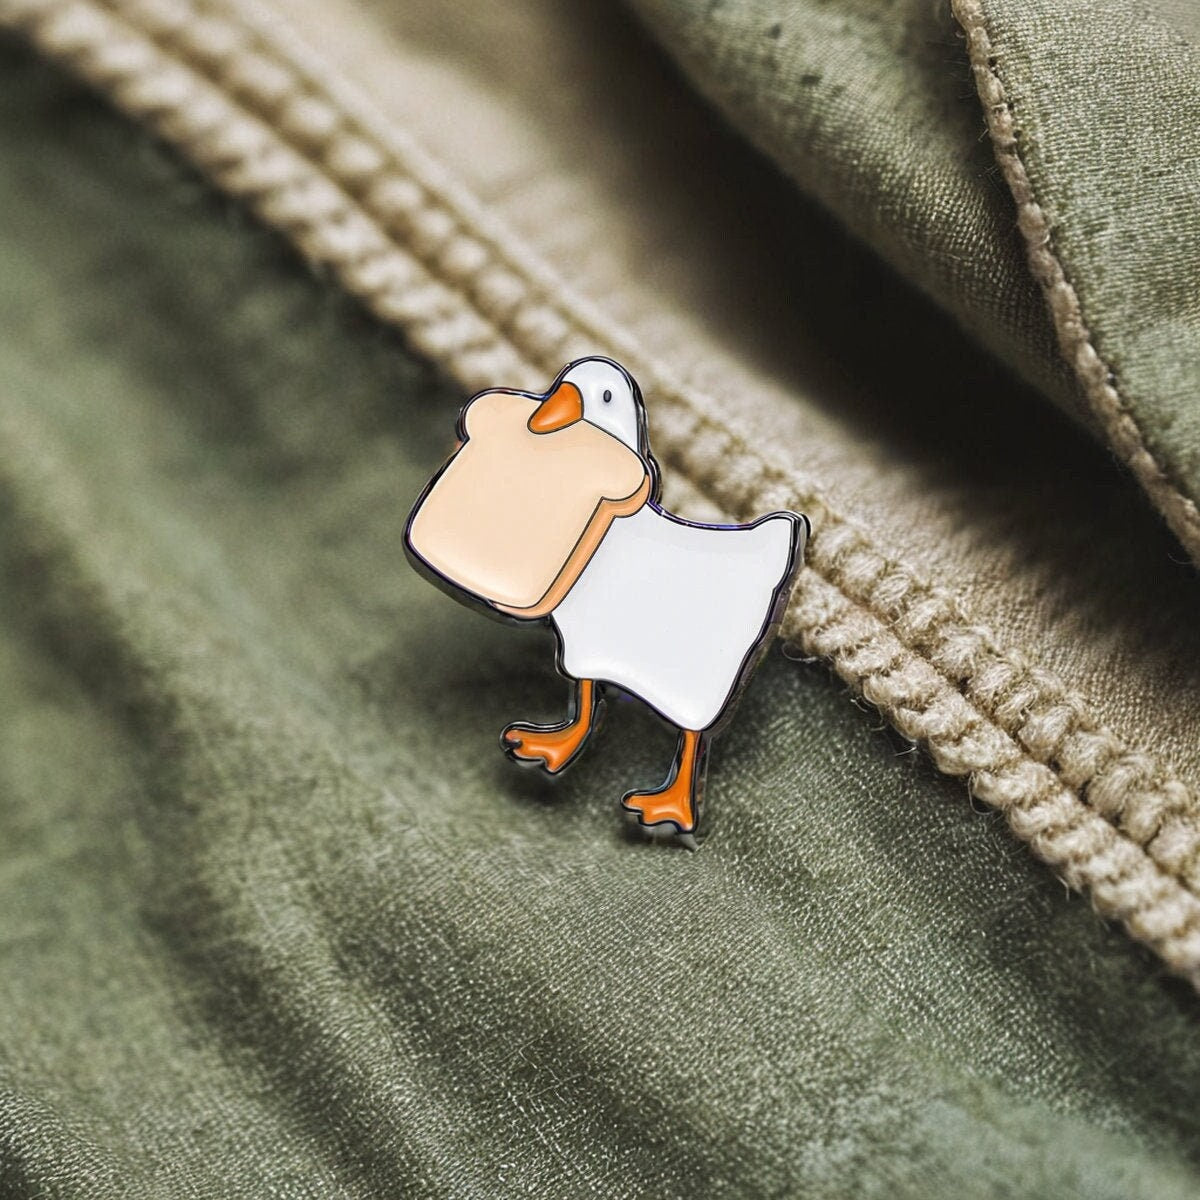 Toast-Thief Duck Enamel Pin - Charming Bread-Loving Duck Accessory for Casual Fun